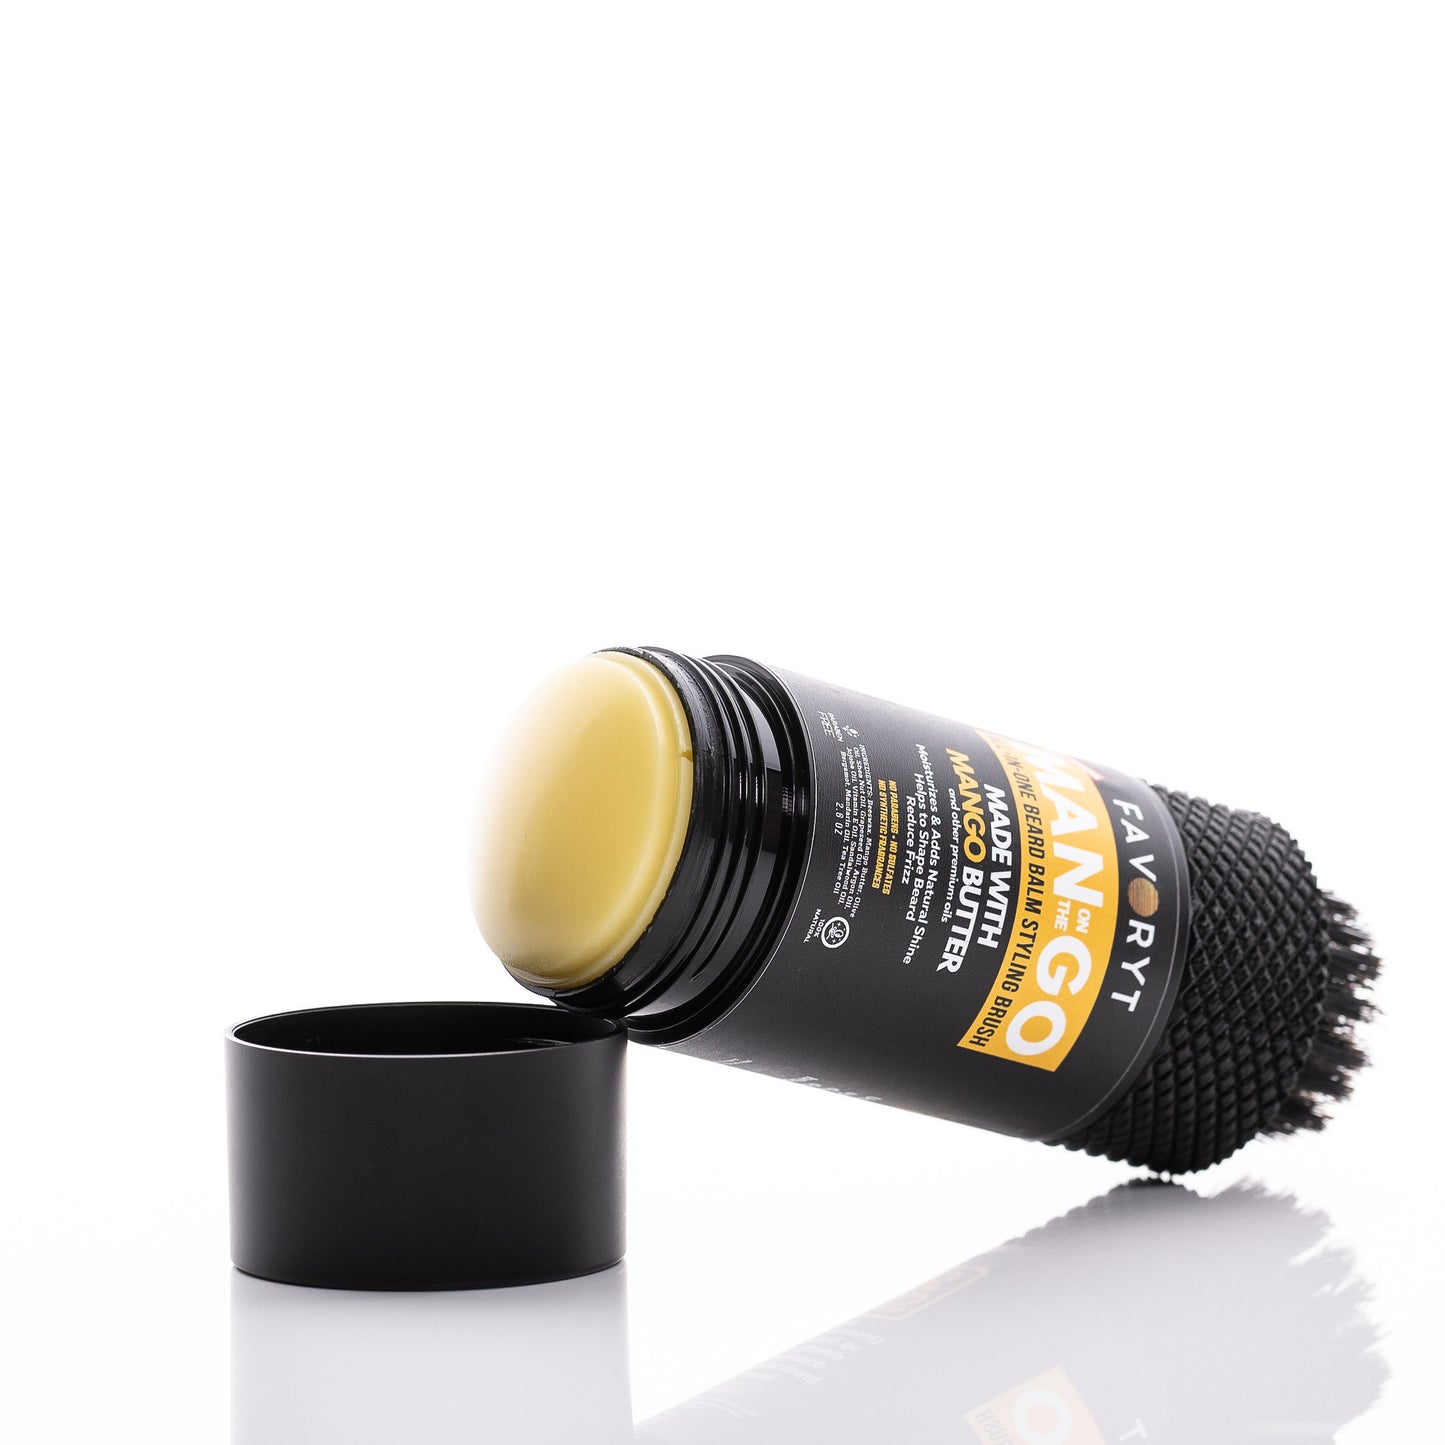 Man on the Go Beard Styling Balm and Brush - FAVORYT BRAND